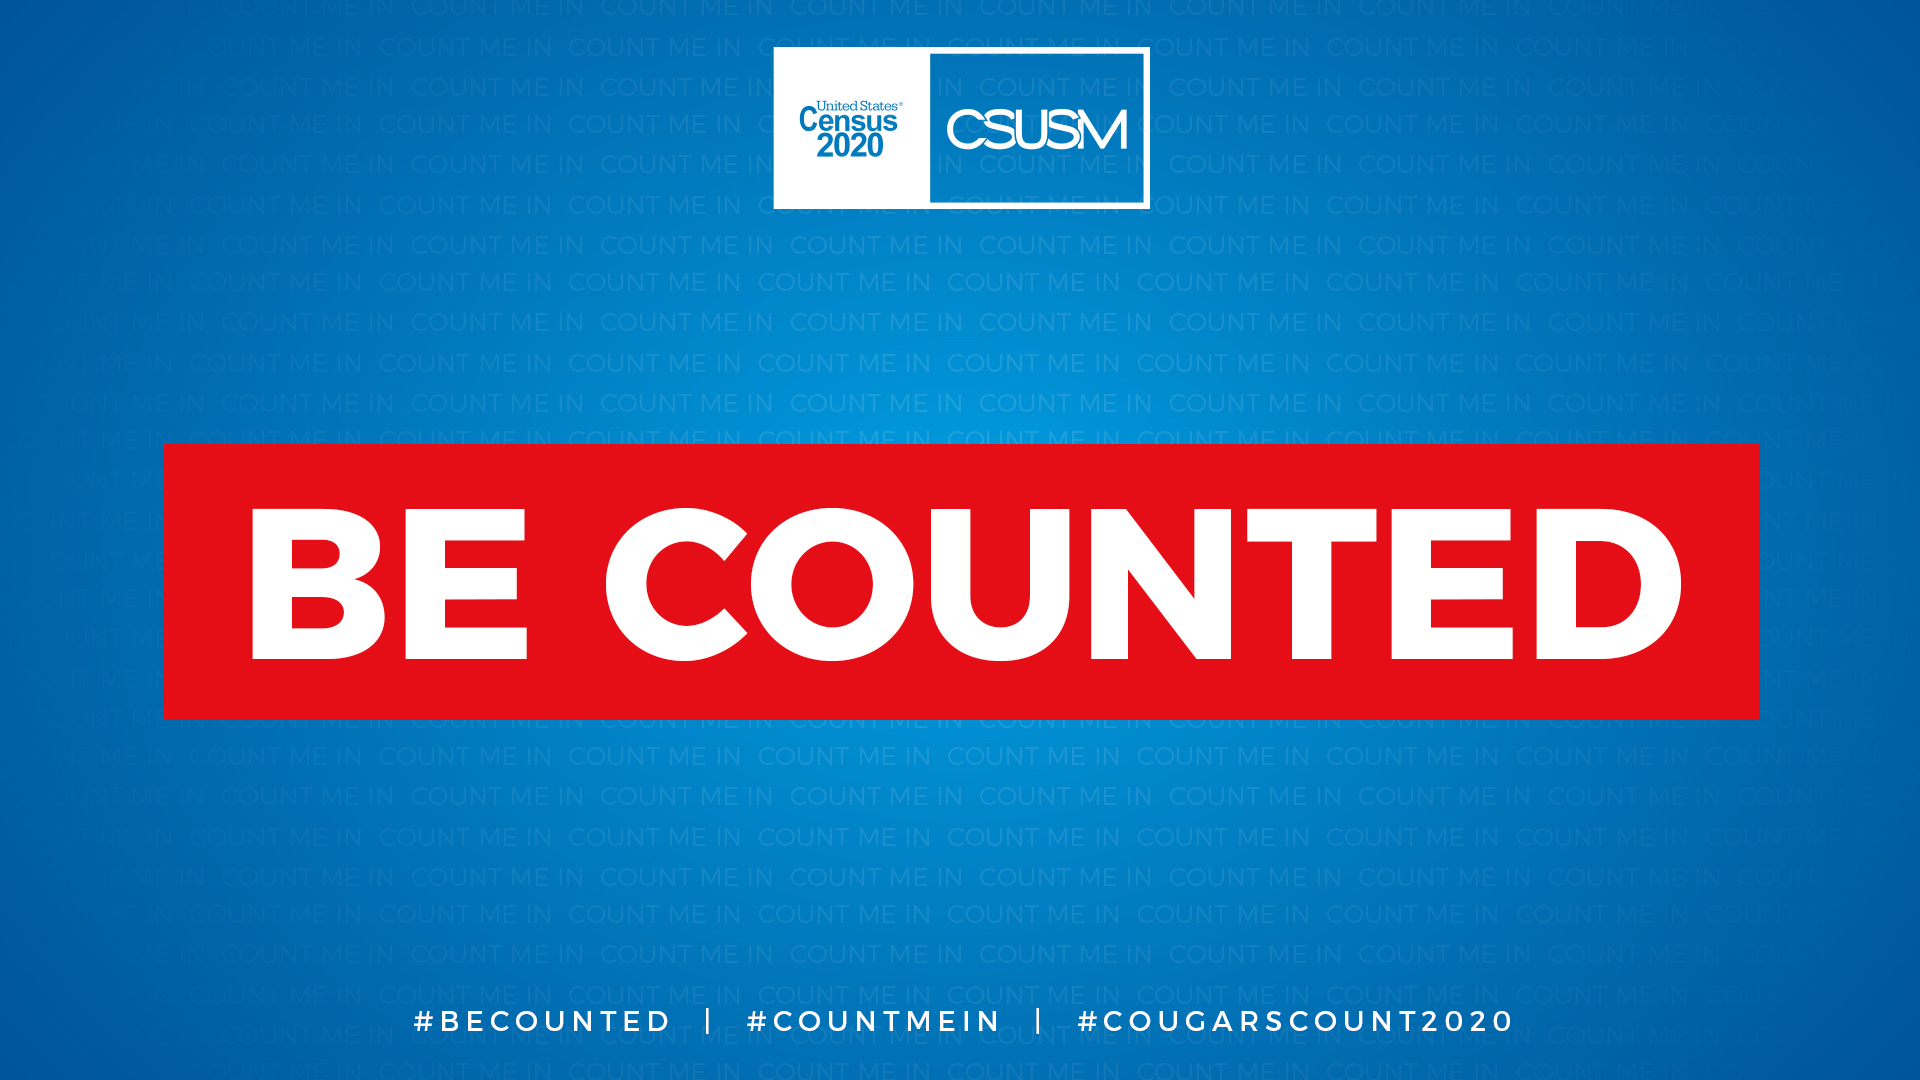 Be Counted CSUSM